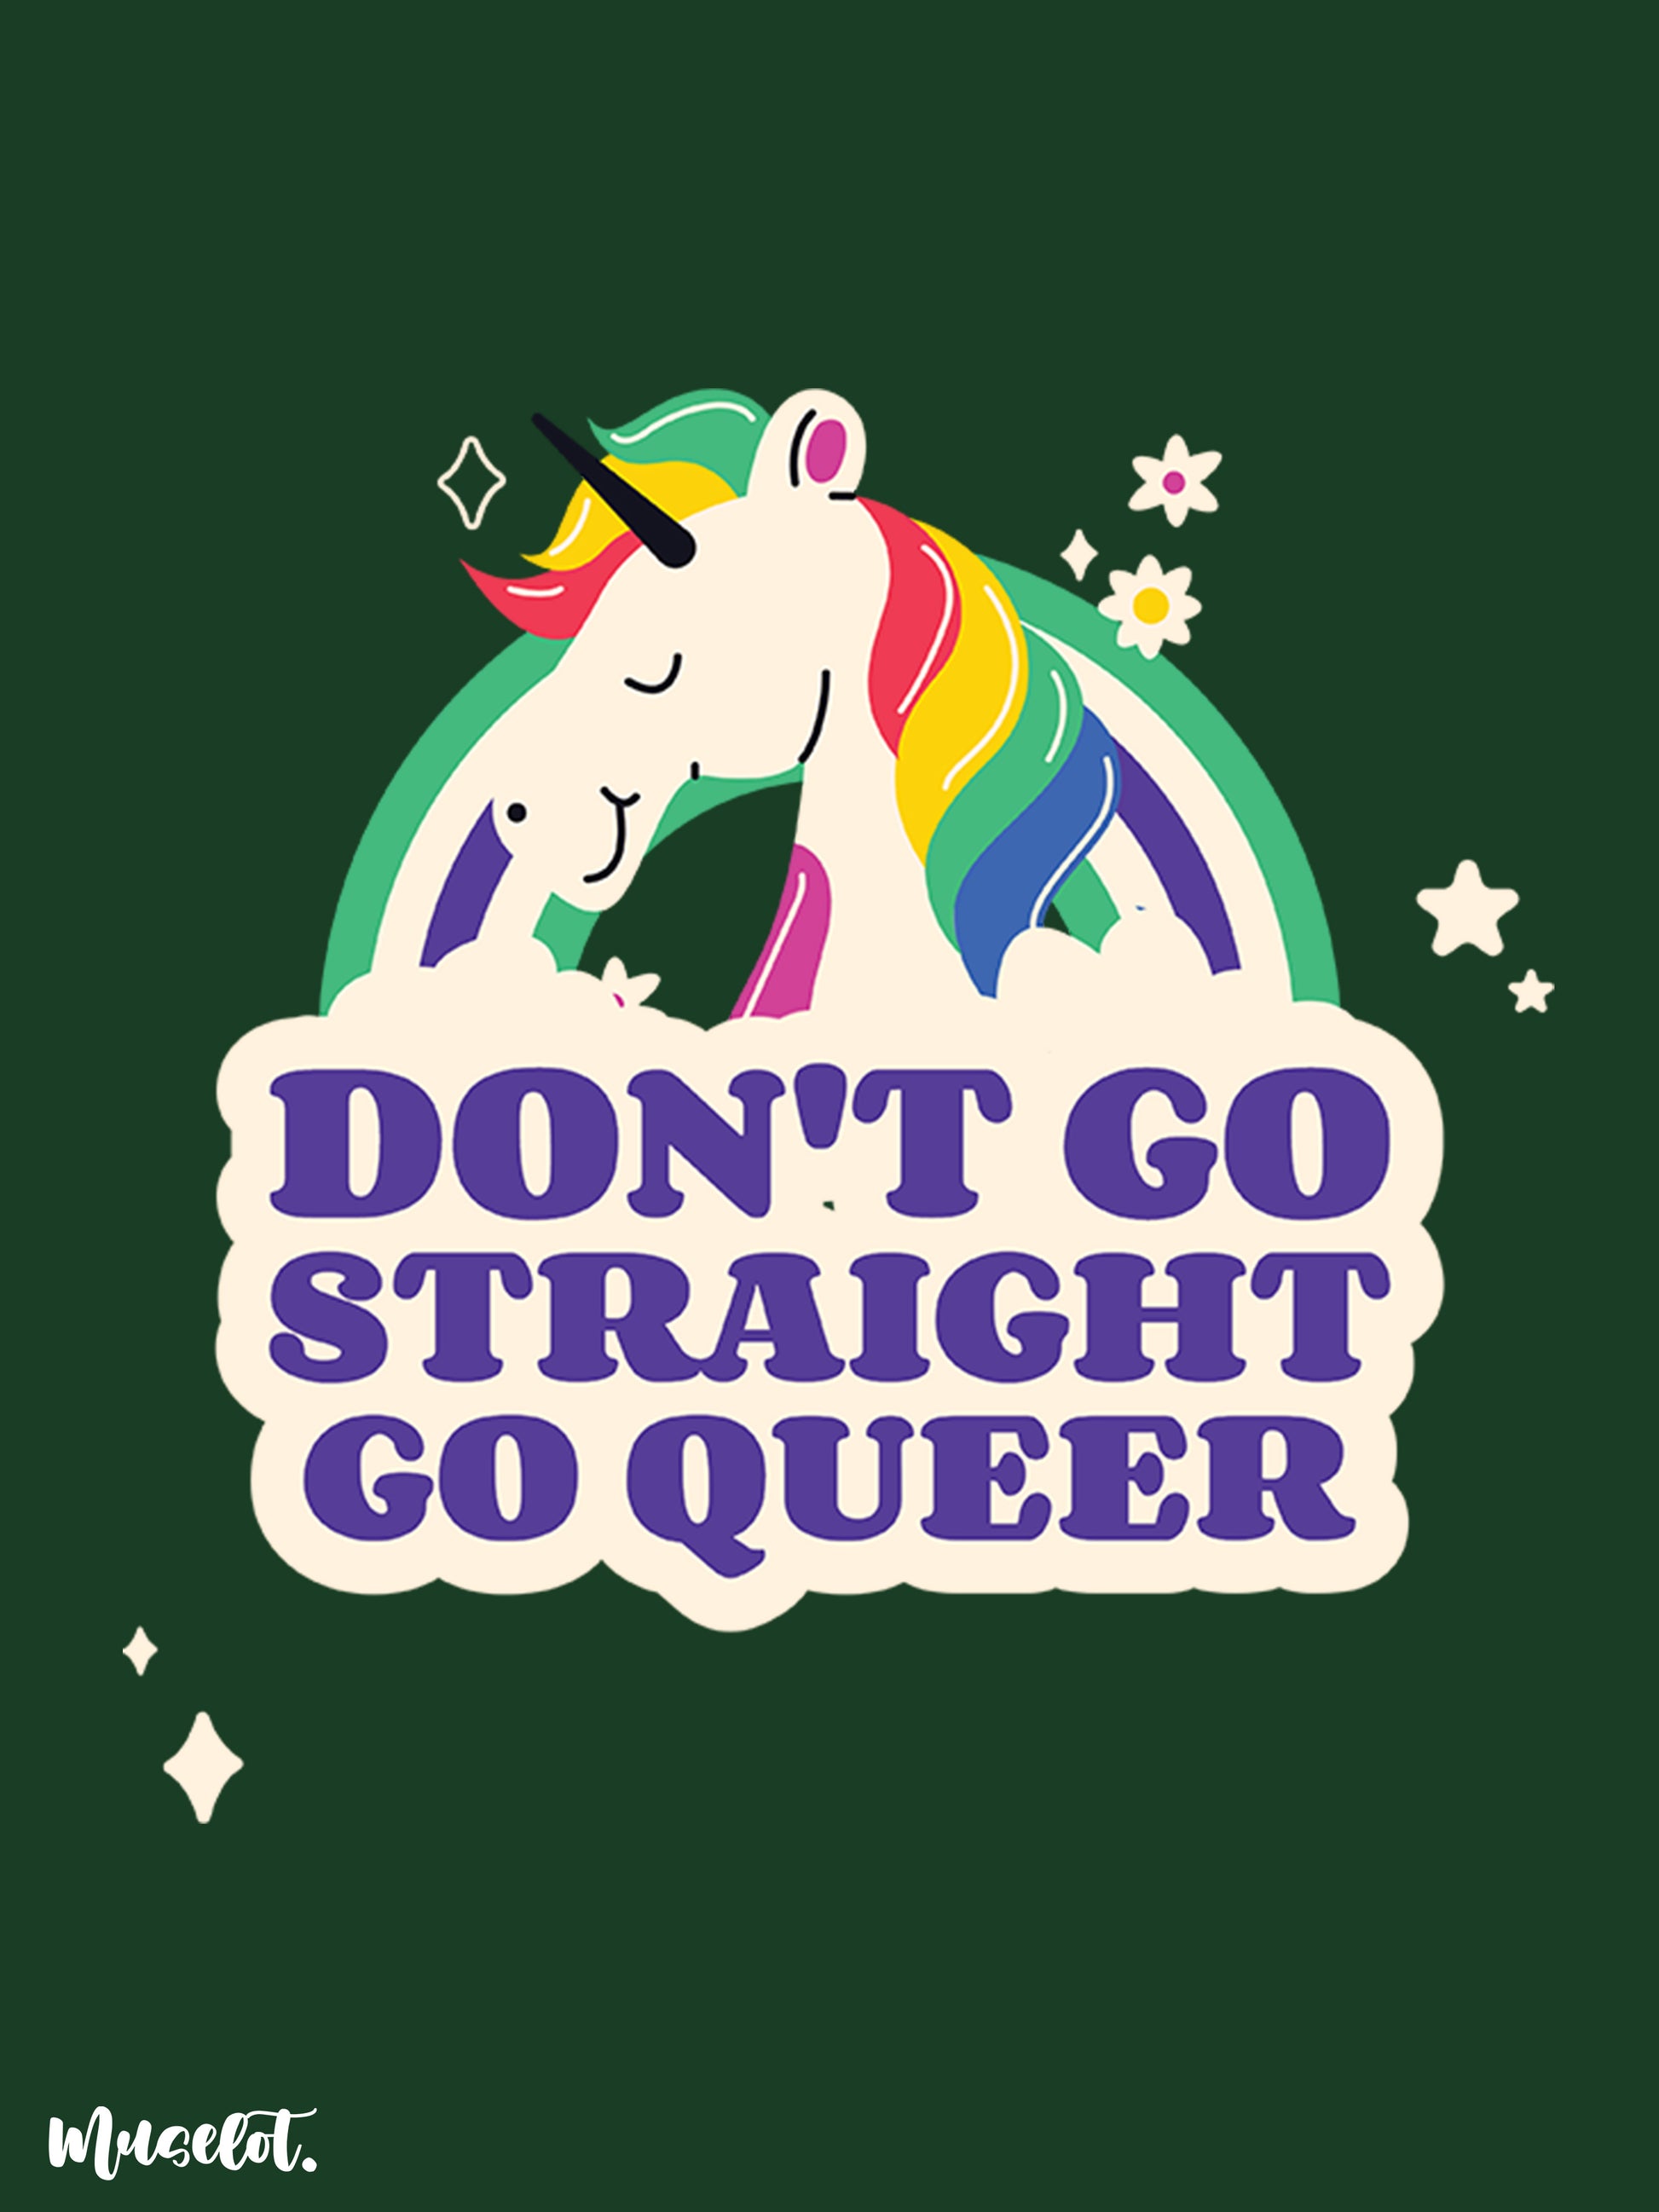 Don't go straight, go queer design illustration for LGBTQ+ pride at Muselot